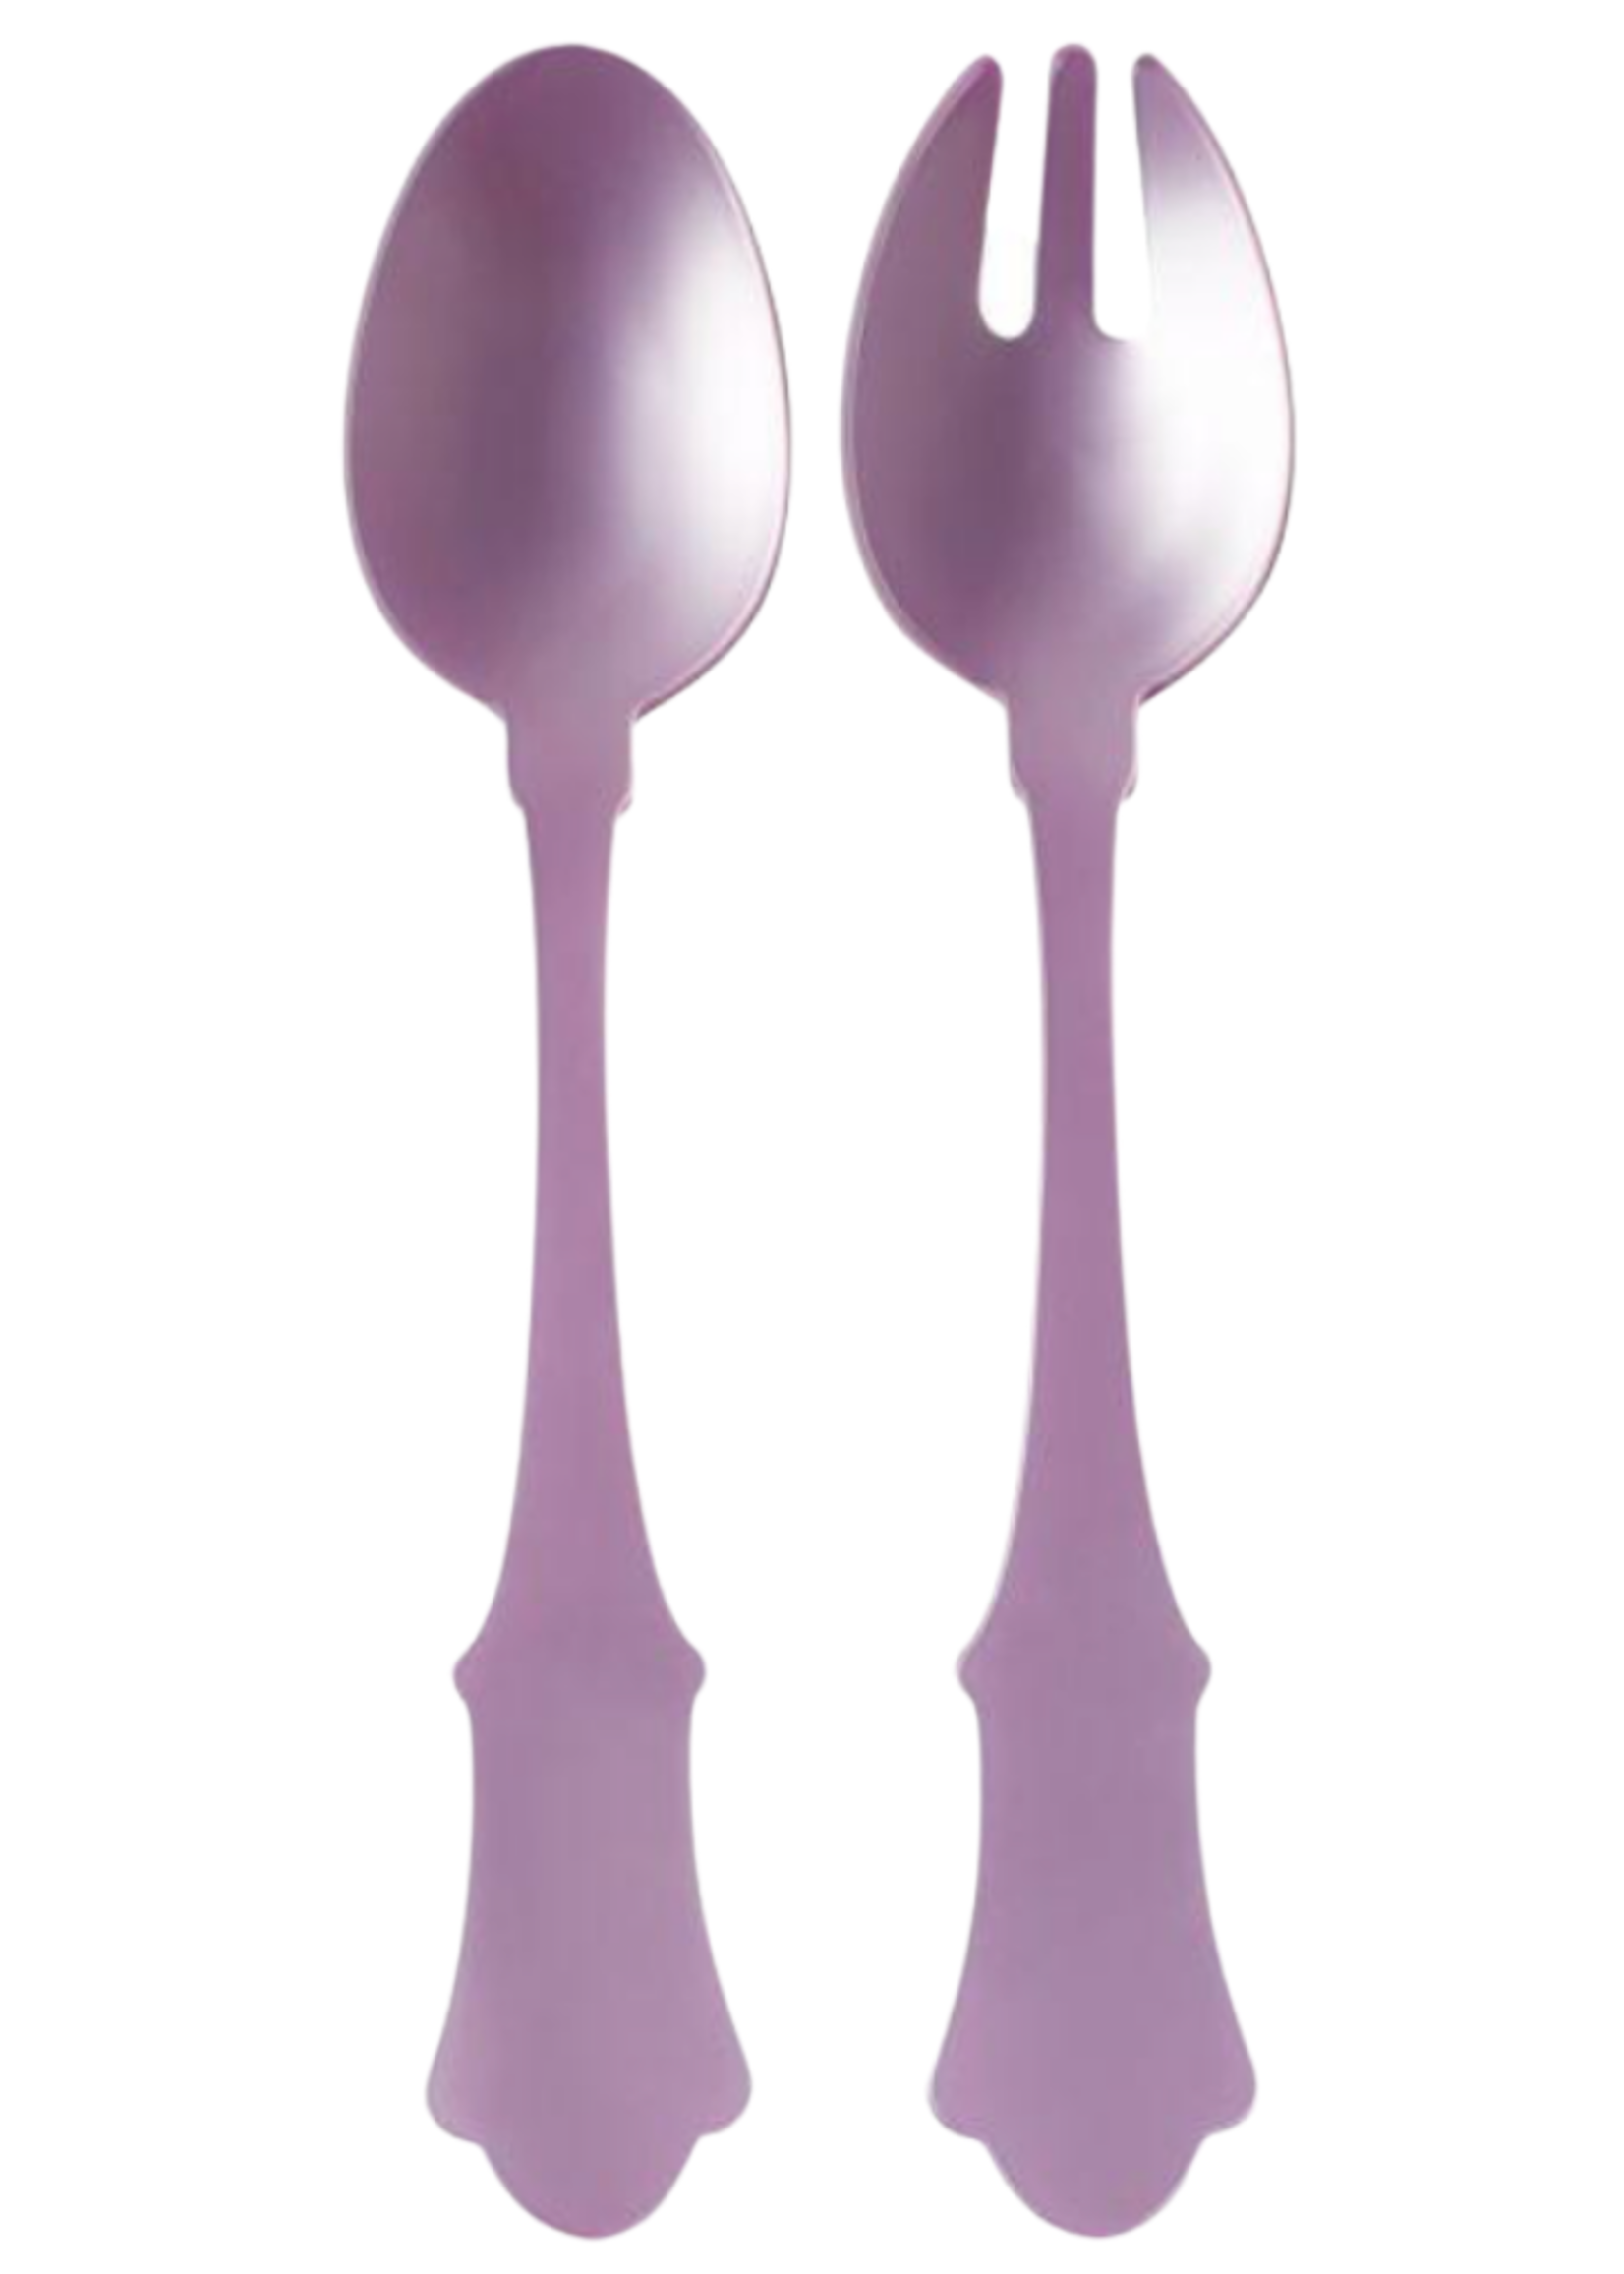 Old Fashioned Acrylic Salad Servers // Colors